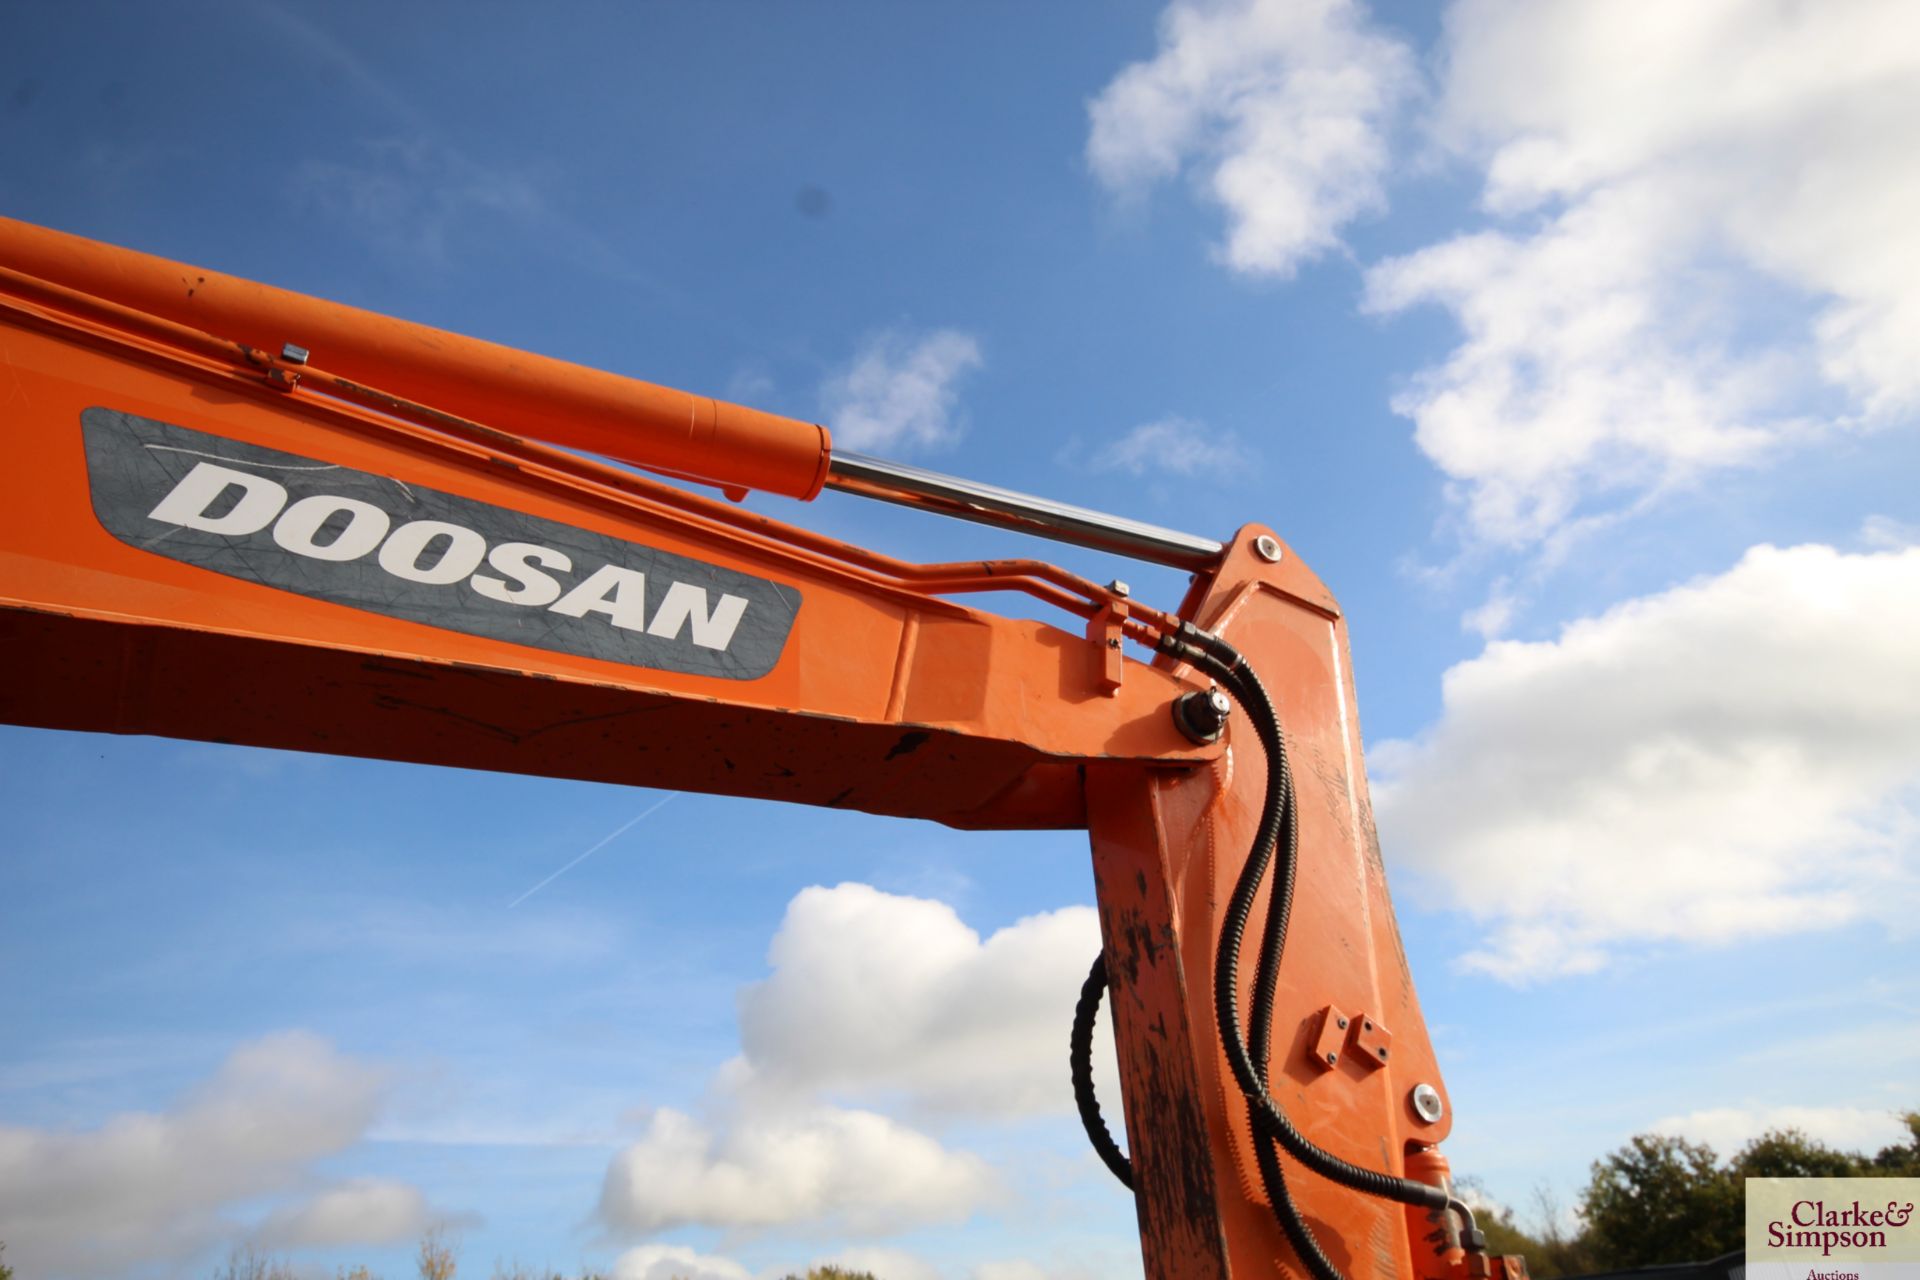 Doosan DX55E 5.5T excavator. 2011. 5,045 hours. Serial number 50461. With new rubber tracks 50 hours - Image 41 of 68